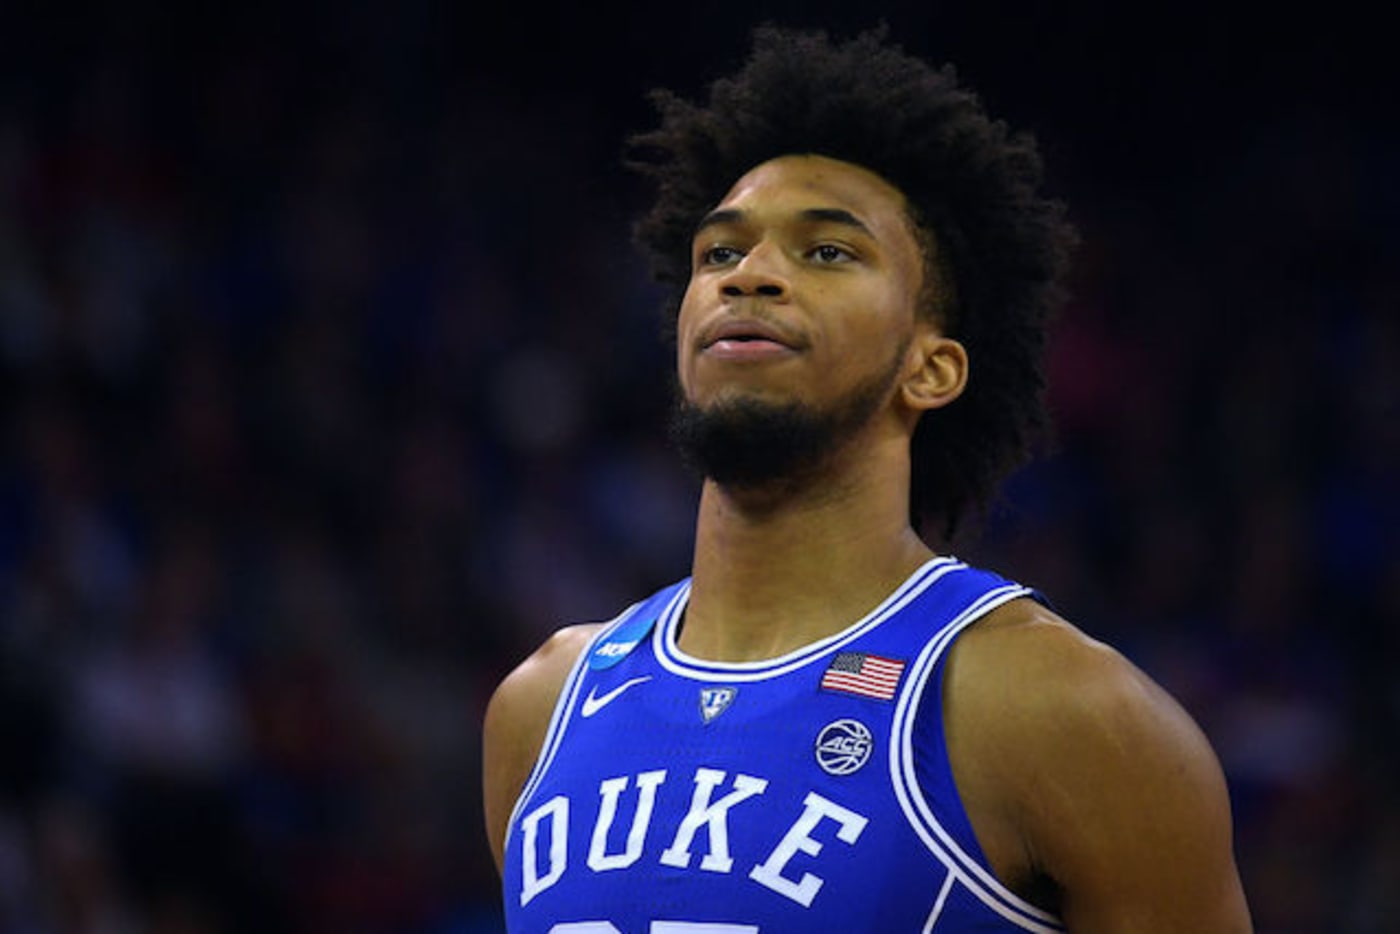 This is a picture of Marvin Bagley.